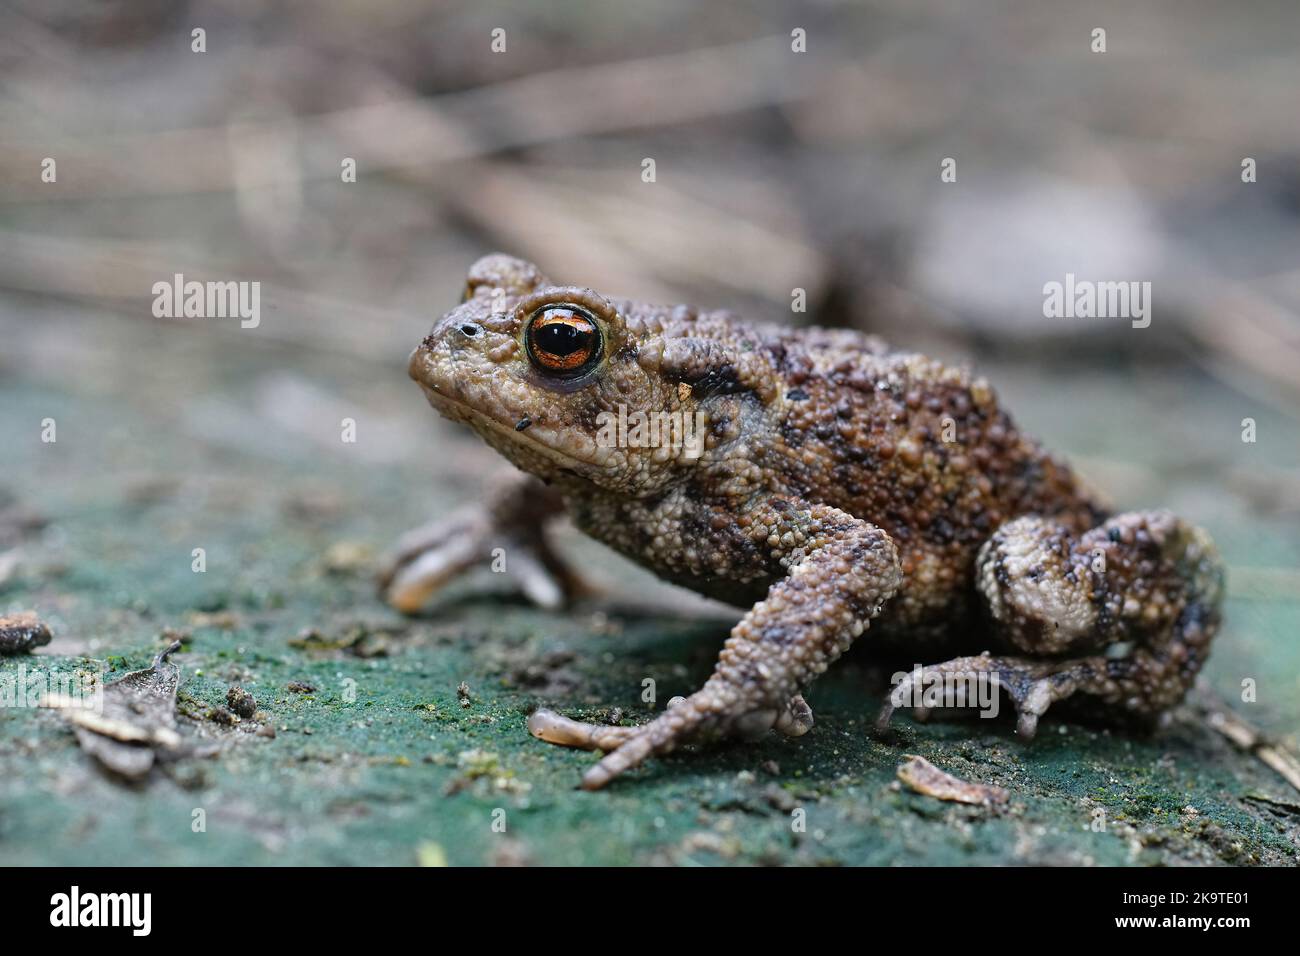 A adult Common European Toad, Bufo bufo sitting on the ground in the garden Stock Photo